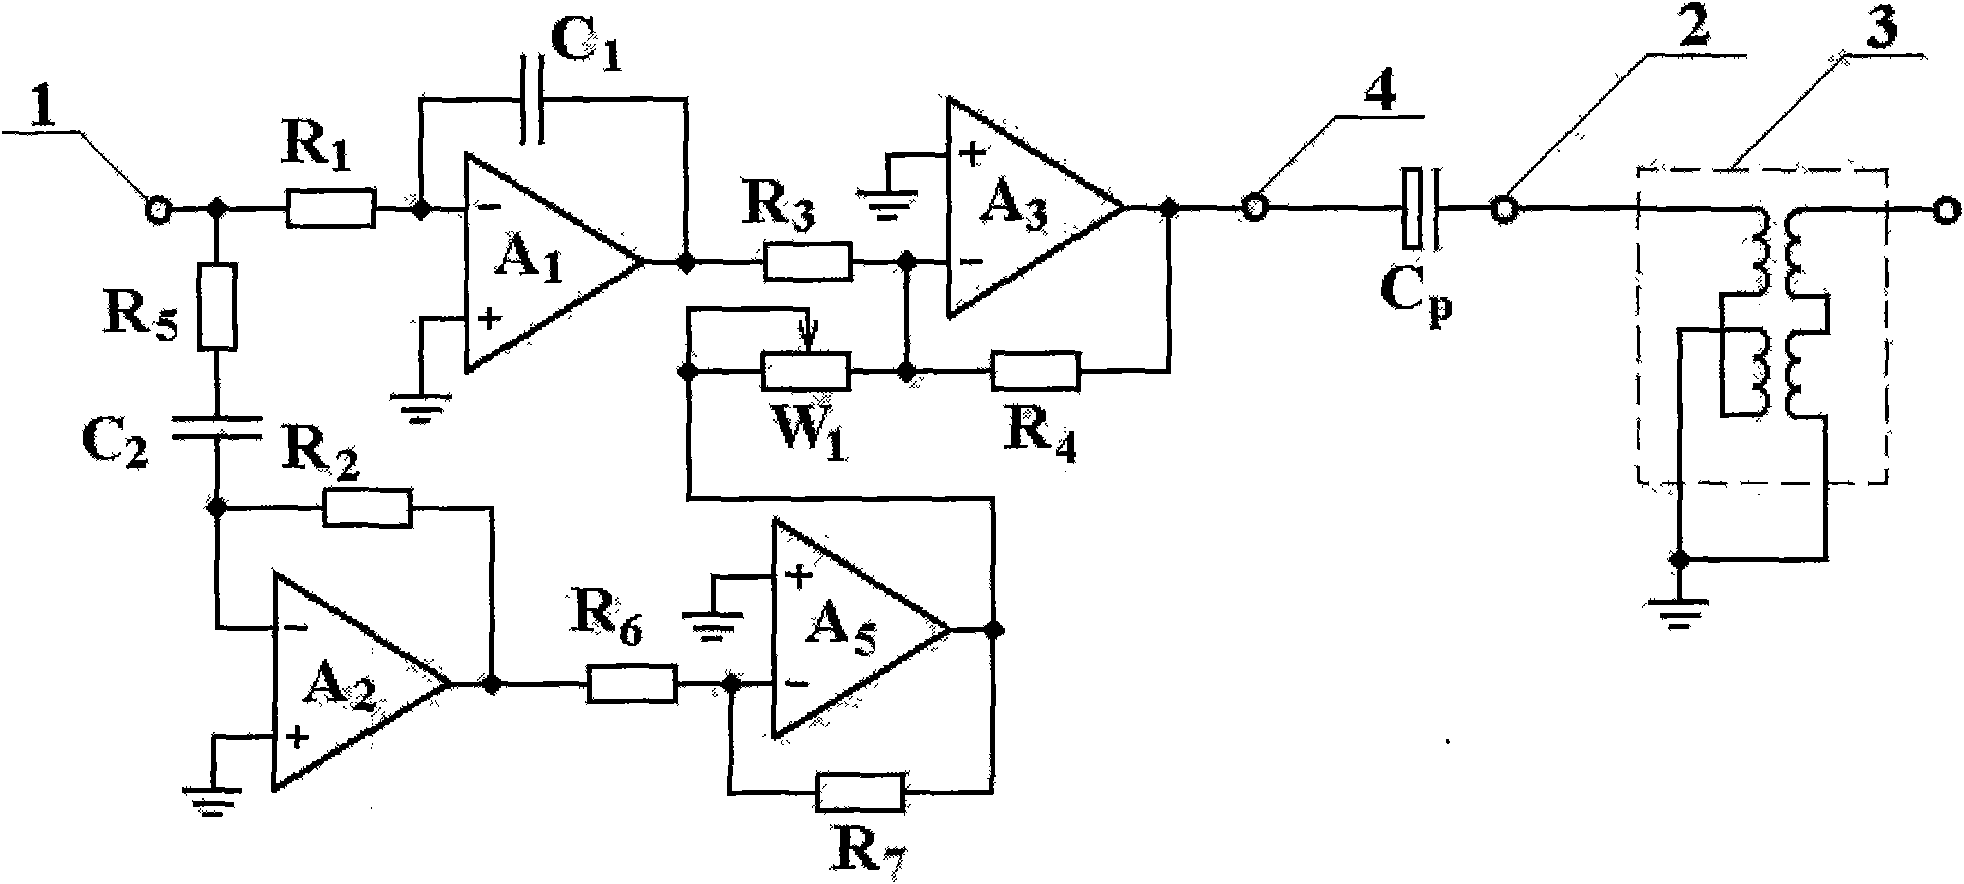 Exciting circuit of flux gate sensor